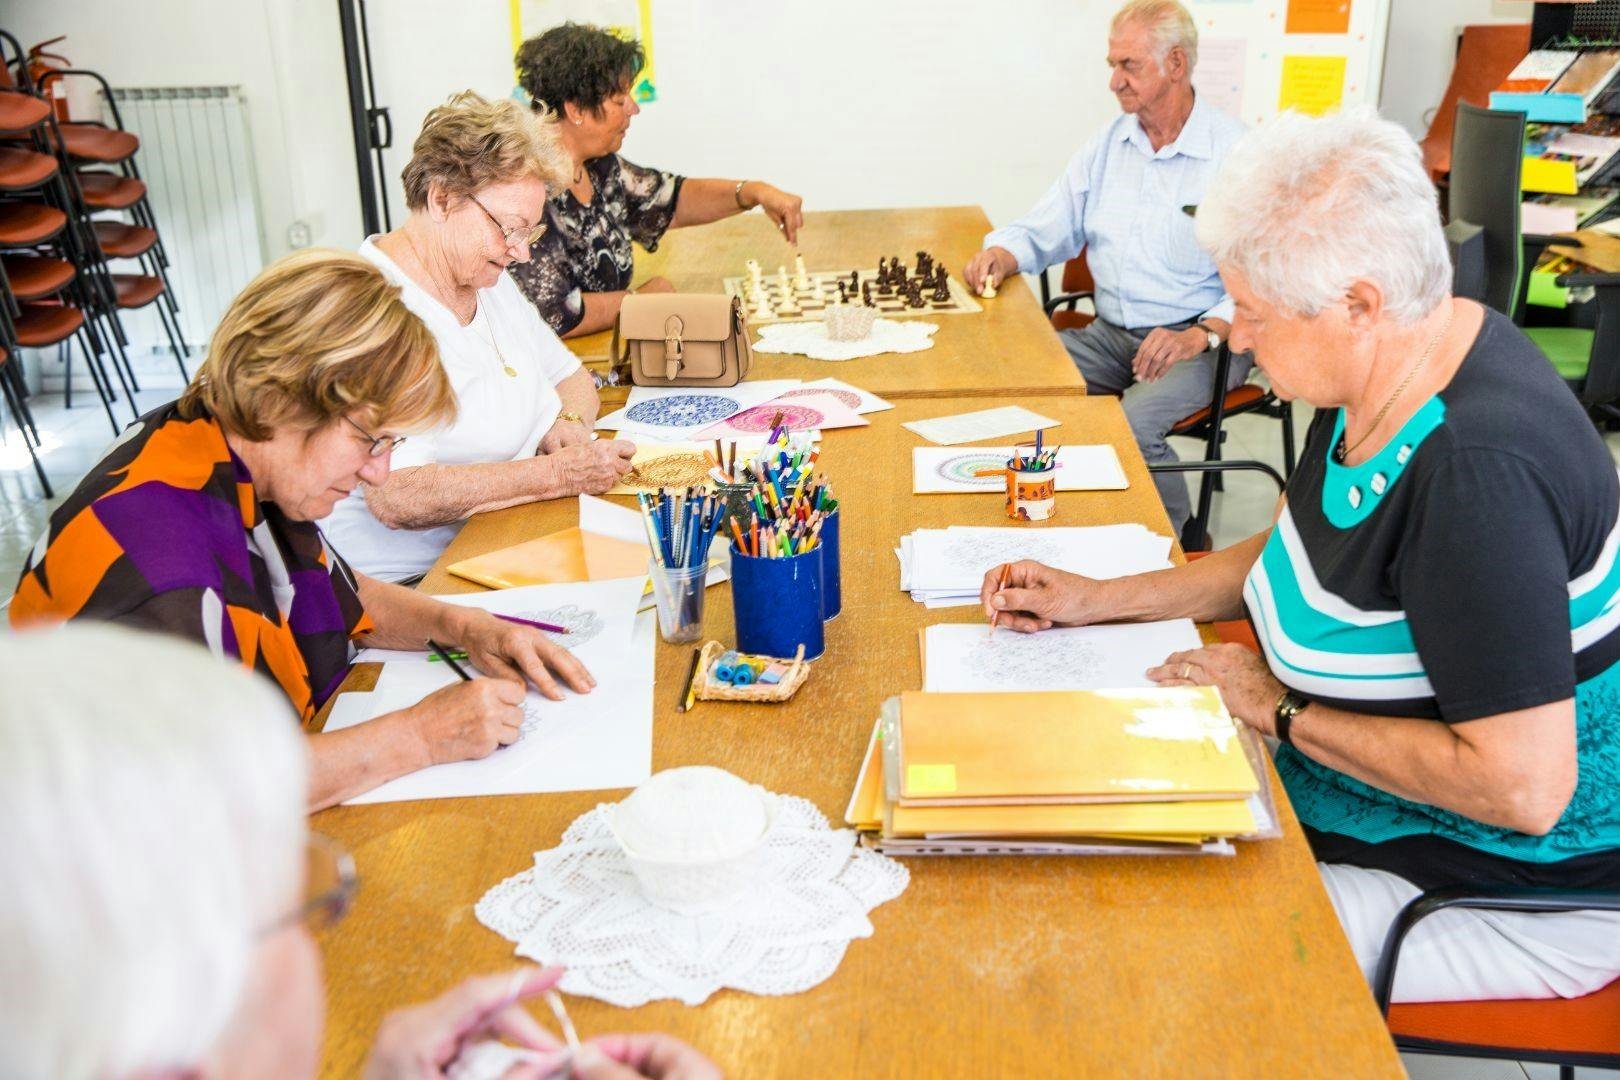 A group of seniors doing craft at a table